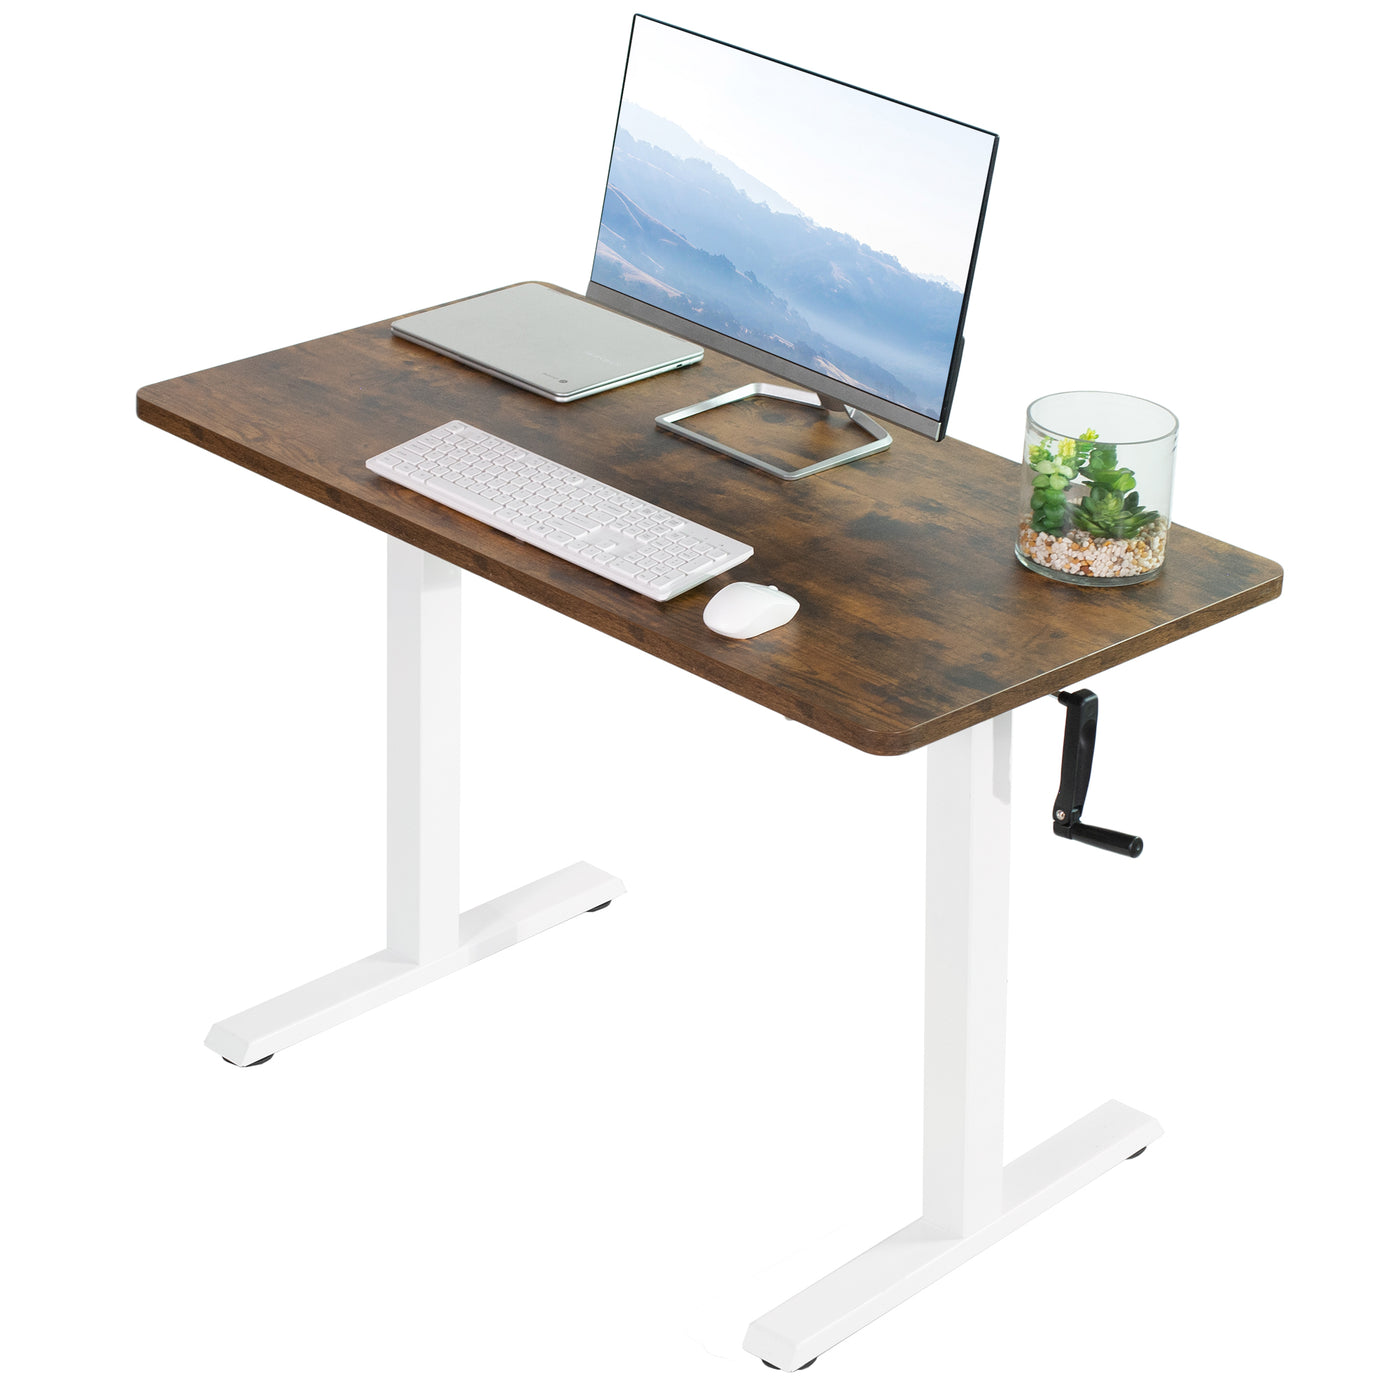 Manual hand crank rustic height adjustable desk for active sit to stand workstation.